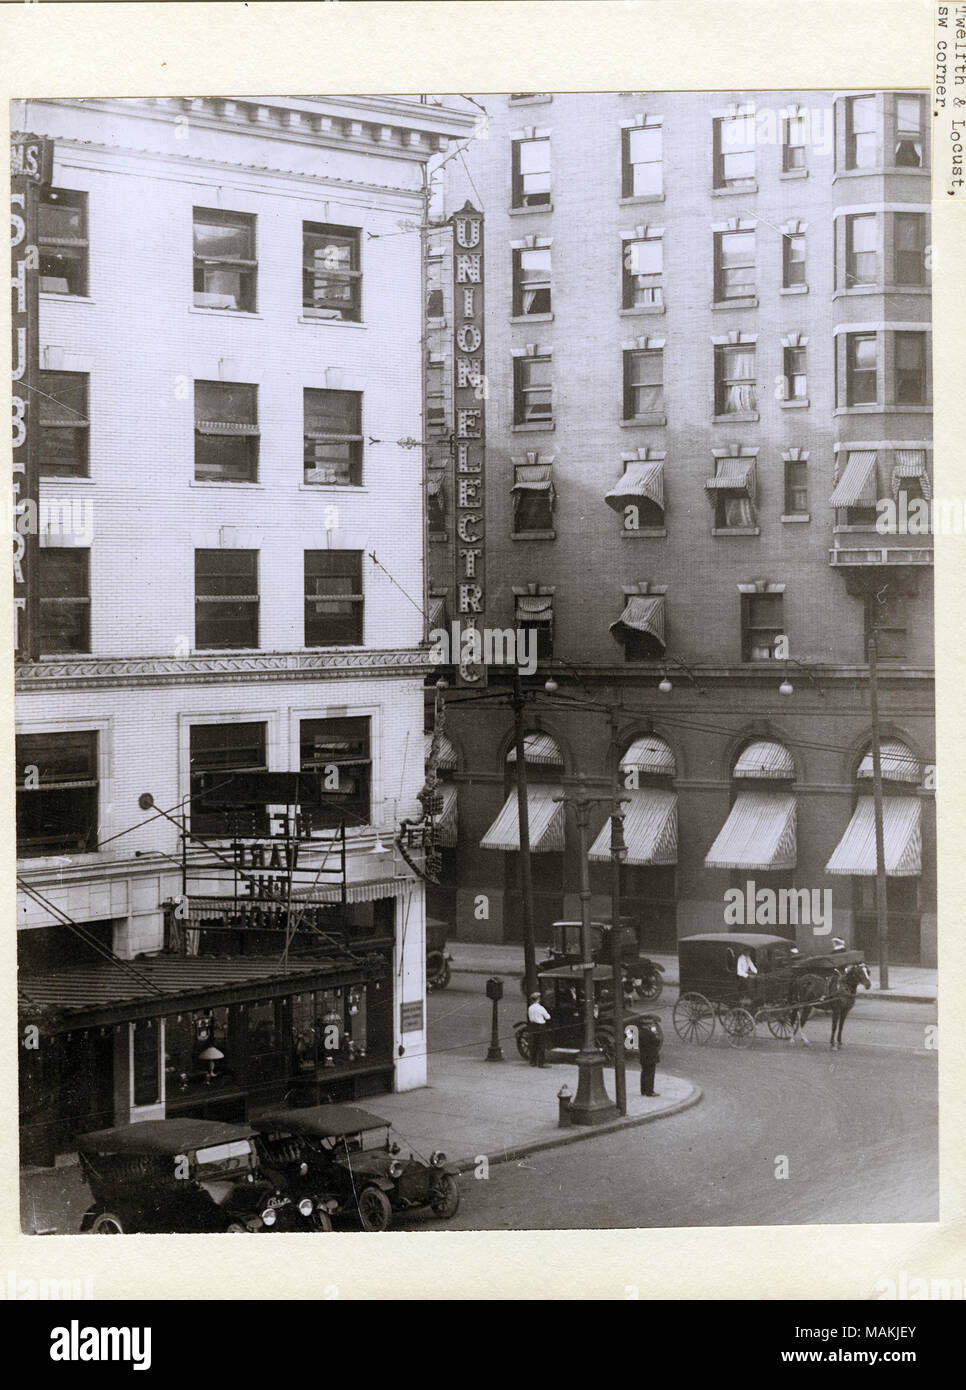 Vertical, black and white photograph showing the Union Electric Building on the southwest corner of Locust and 12th Street, now Tucker Boulevard. An electric 'Union Electric' sign is attached to the side of the building. Several cars are parked along the curb, and a horse-drawn carriage or buggy is driving along the street. Along the right edge, a sign can be seen for the Shubert Theatre. Title: Union Electric Building on the southwest corner of Locust and 12th Street, now Tucker Boulevard.  . circa 1910. Holt, Charles Clement, 1866-1925 Stock Photo